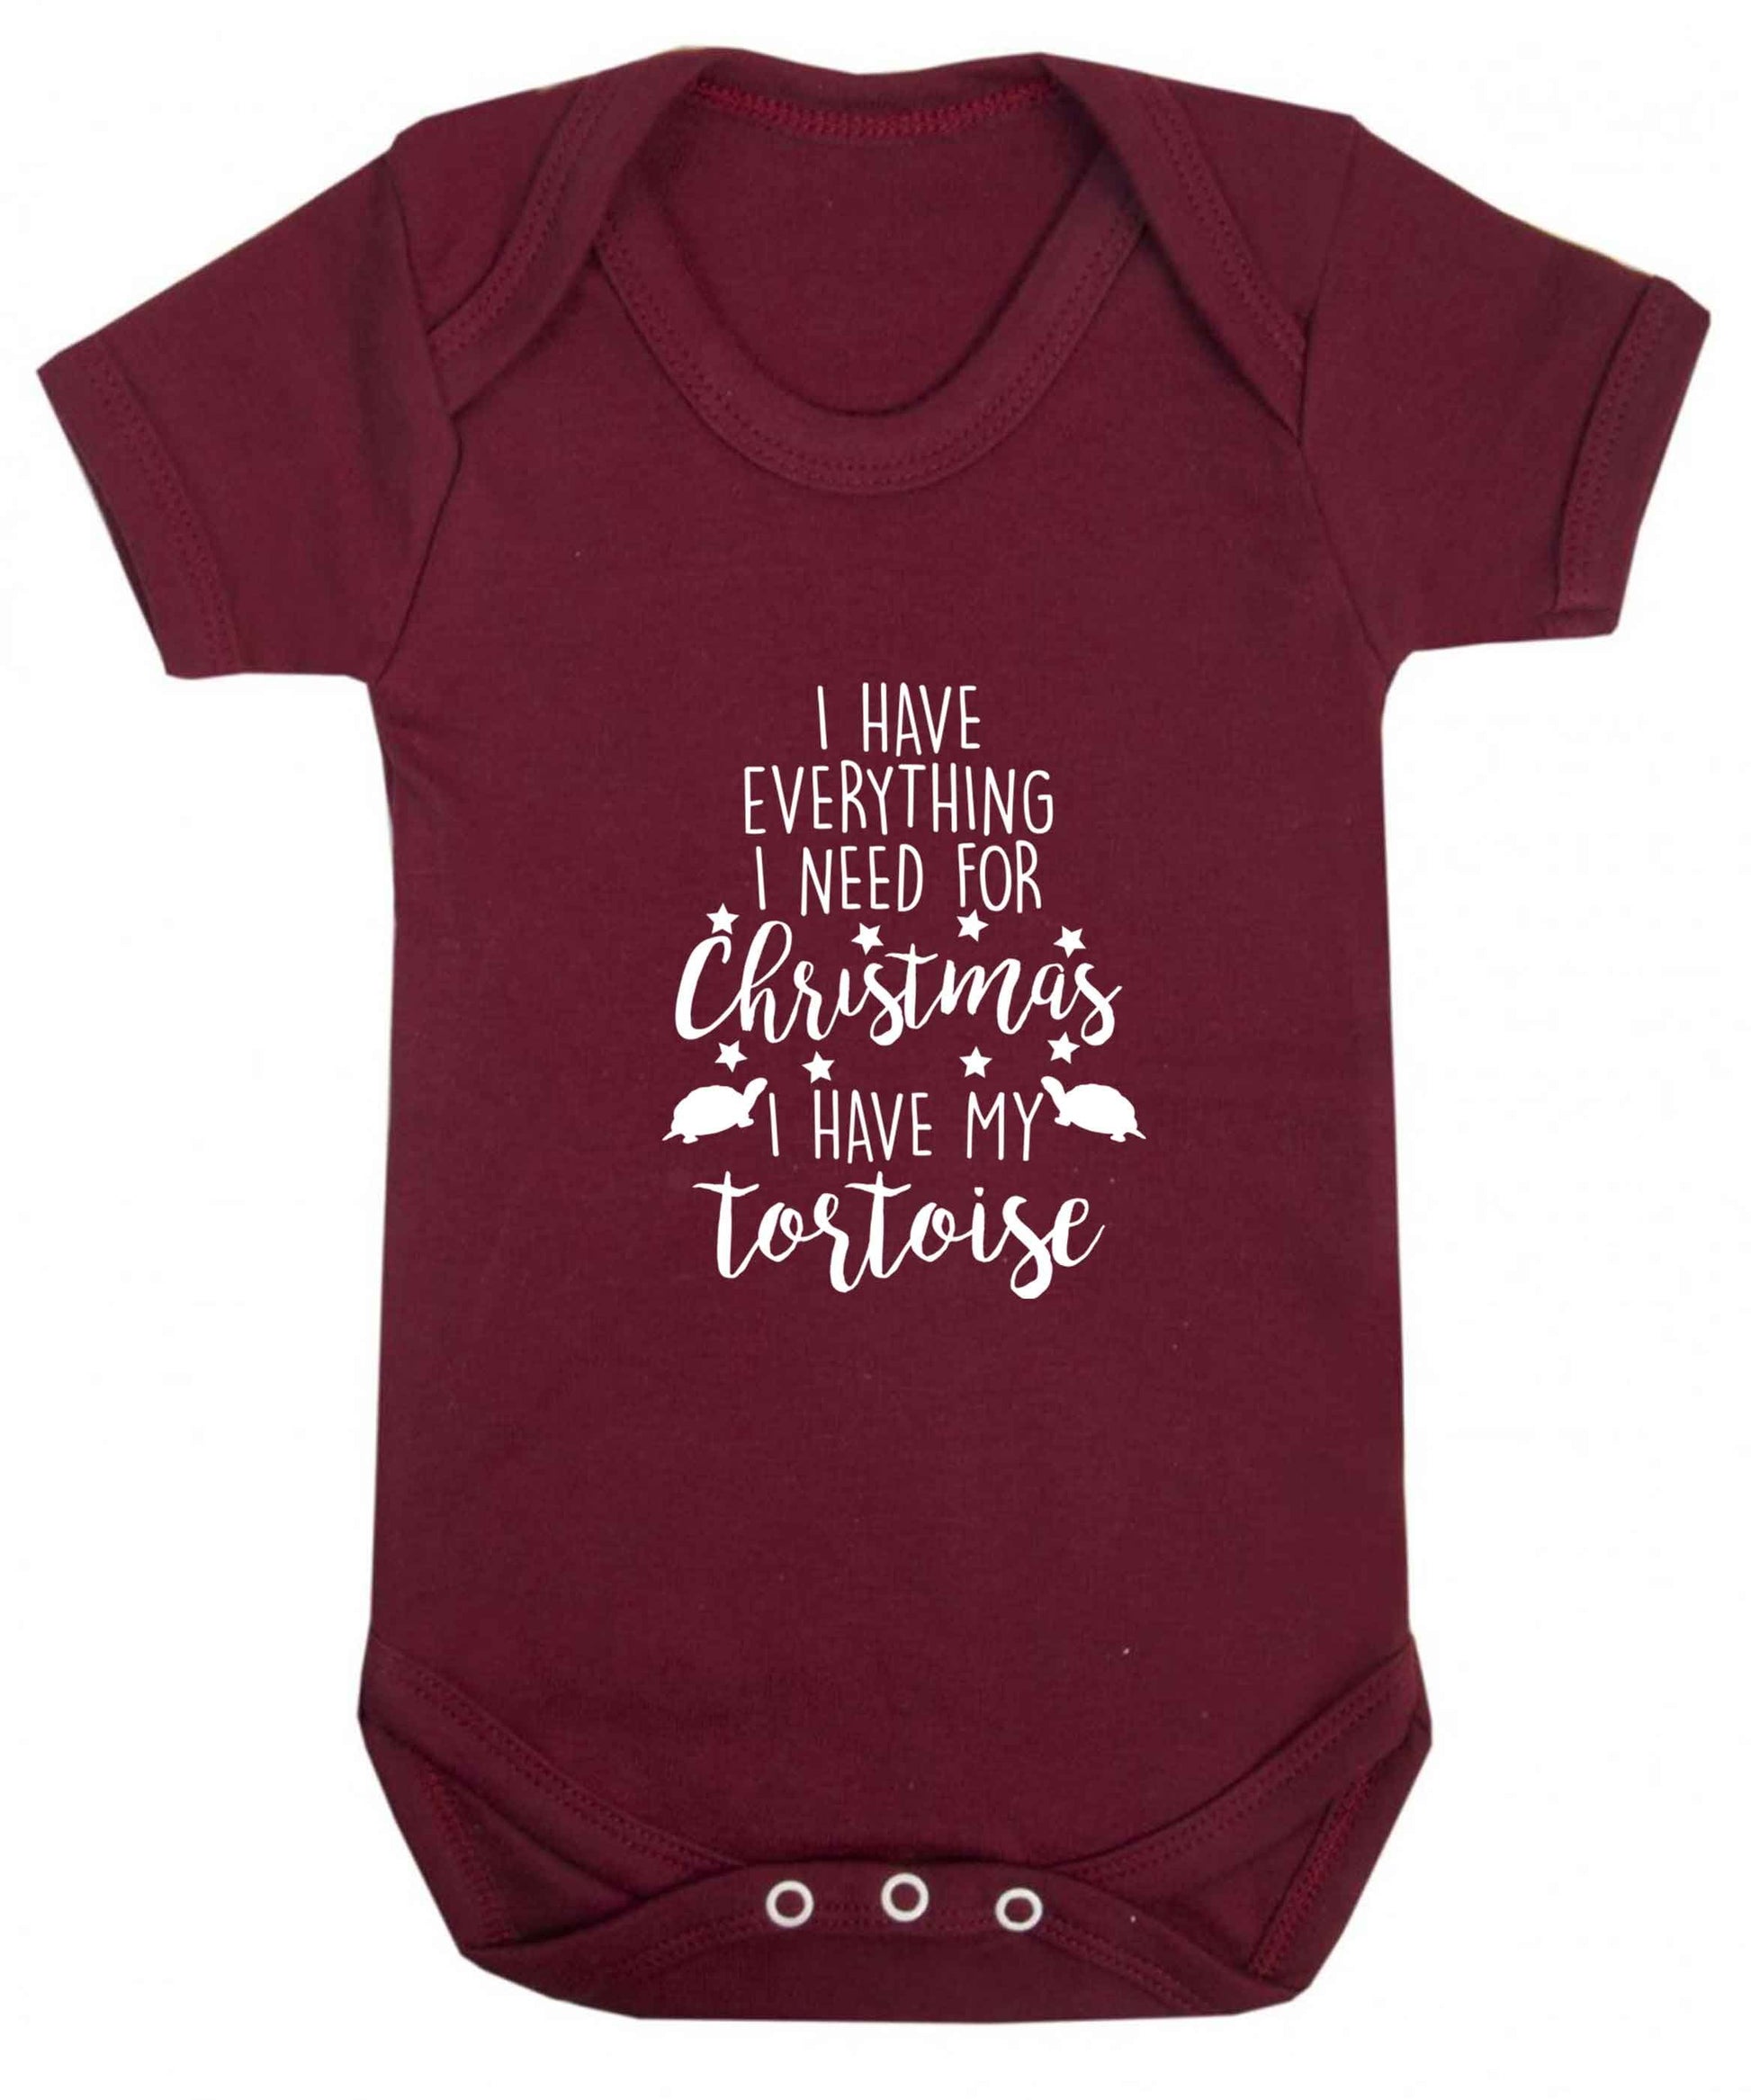 I have everything I need for Christmas I have my tortoise baby vest maroon 18-24 months